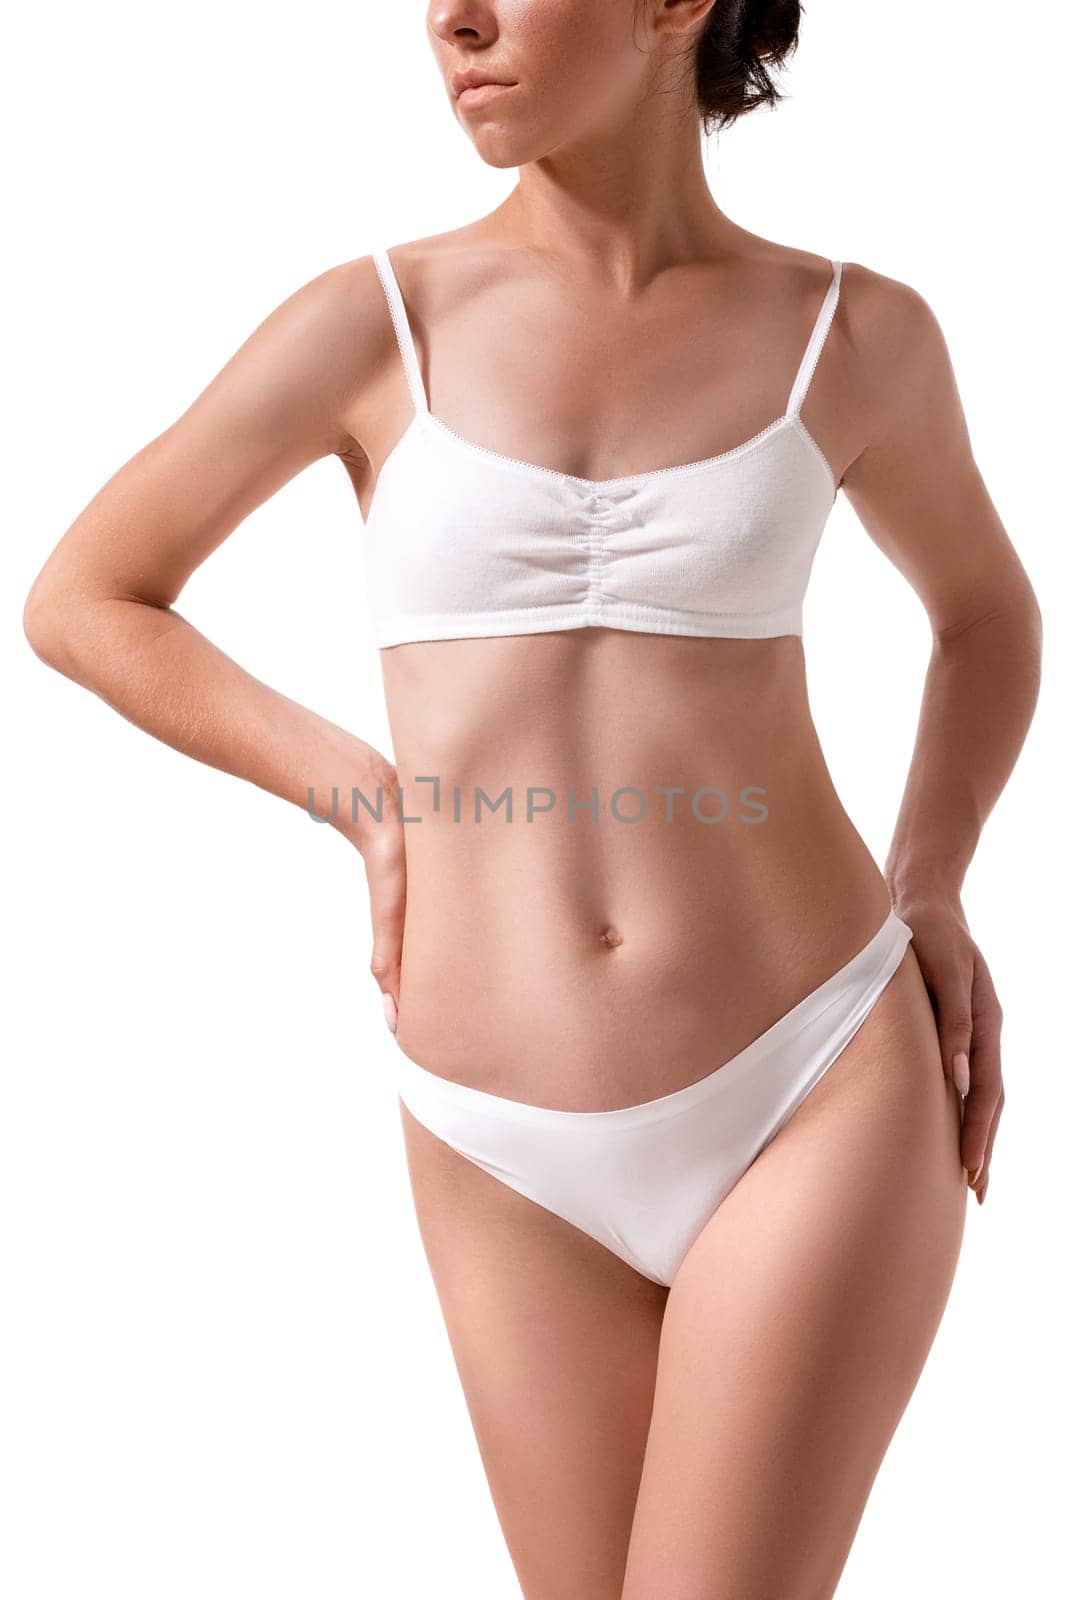 Slim tanned woman's body. Isolated over white background. Diet. Sport. Health